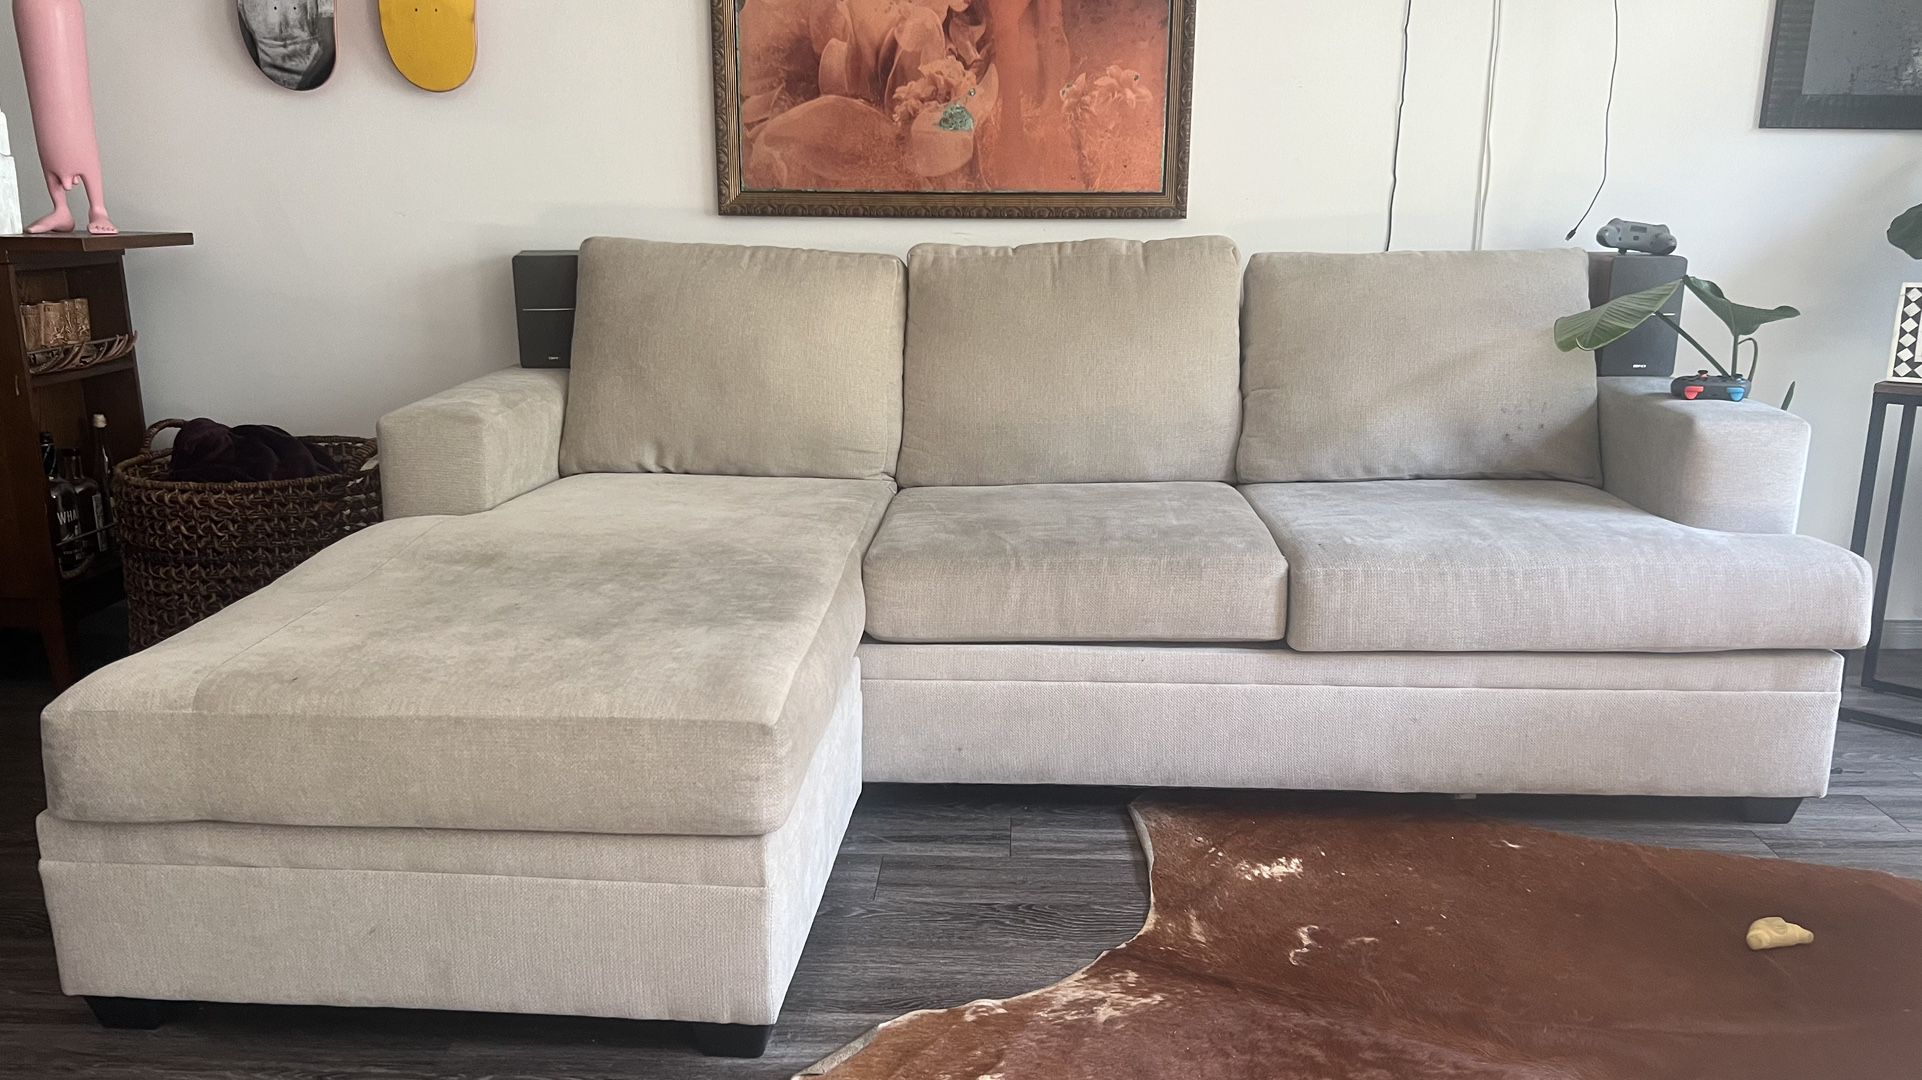 Beige sectional couch